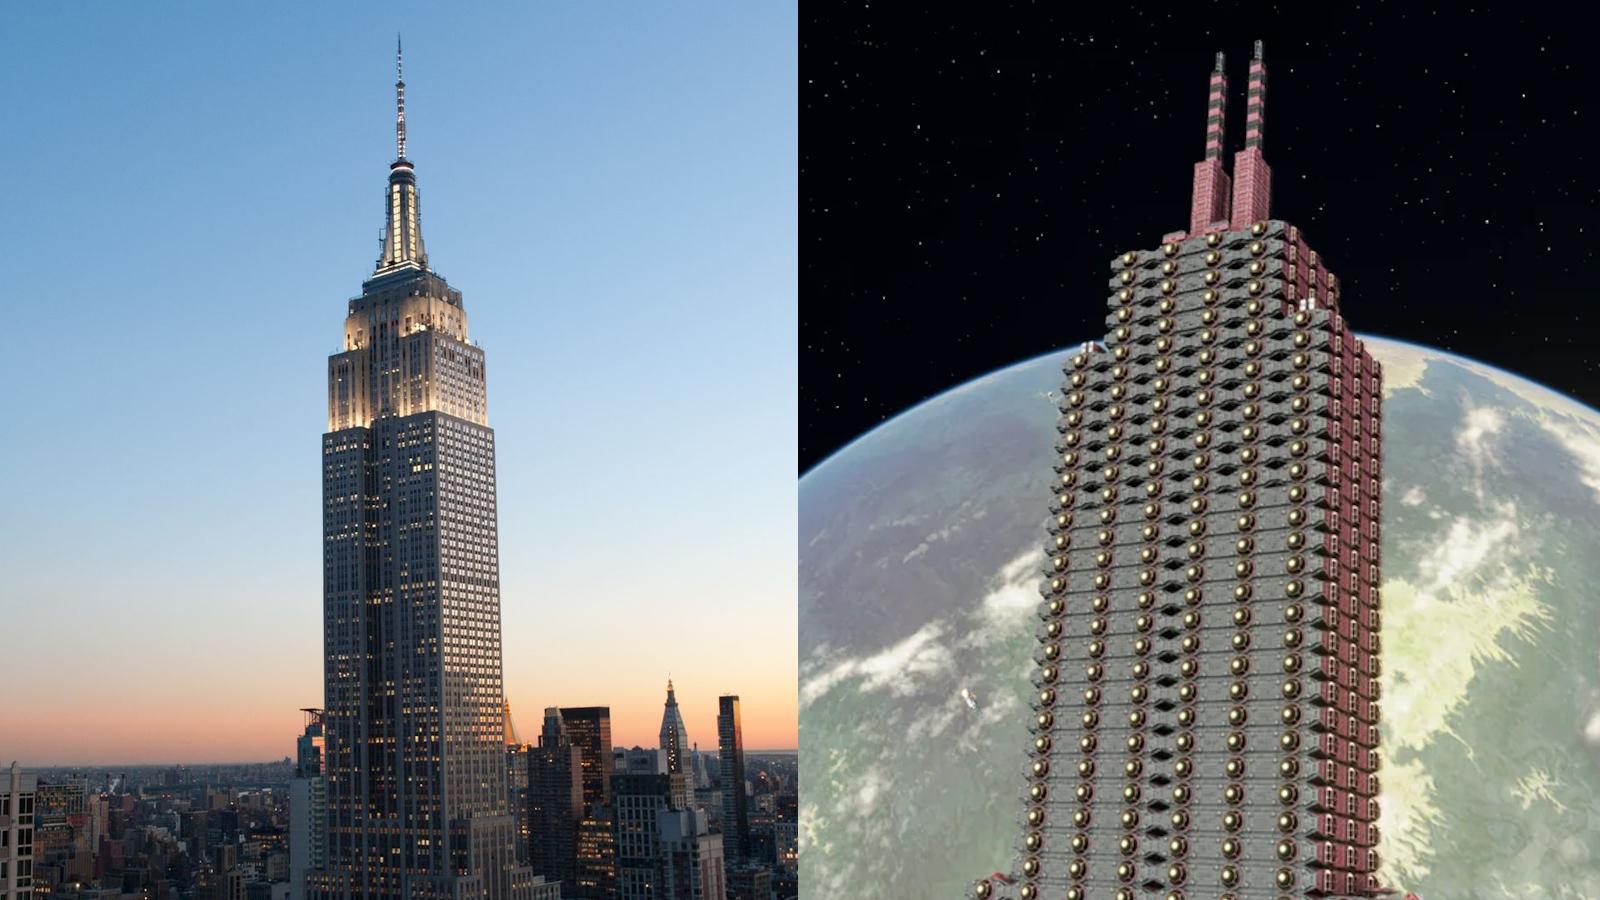 The Empire State Building (left) and the Empire Space Building ship in Starfield (right).